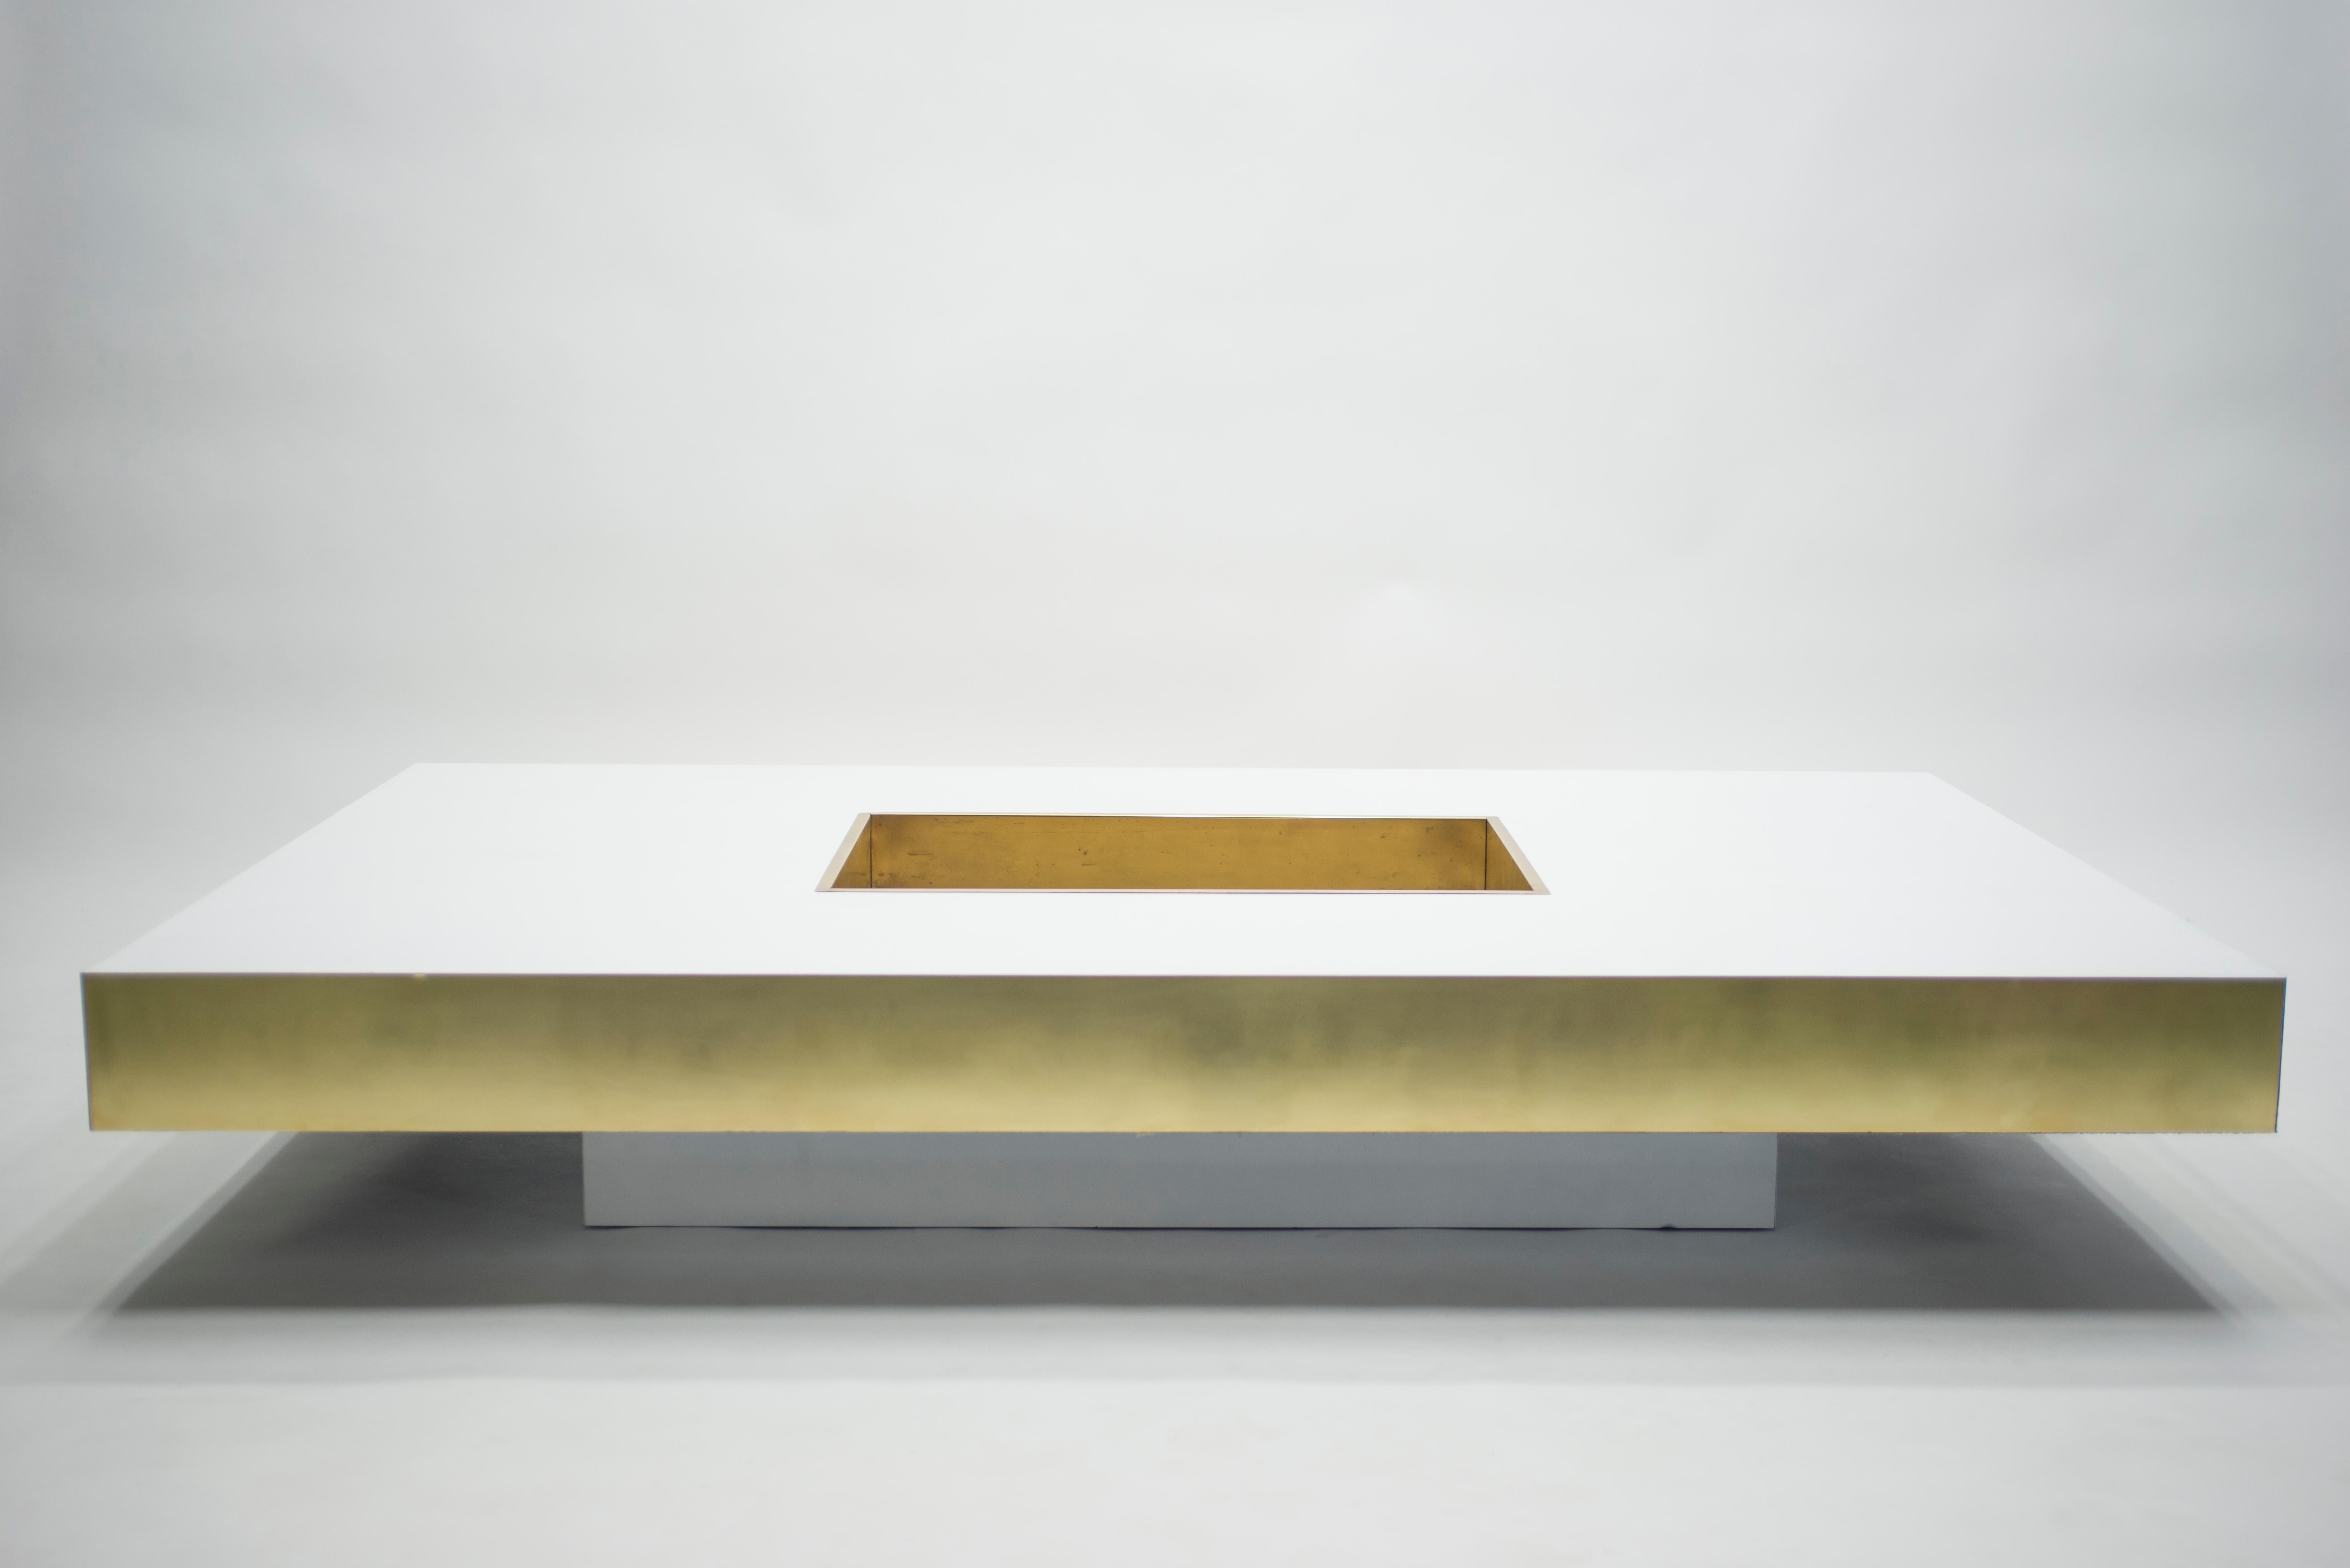 This stunning coffee table is guaranteed to be the focus of attention when you entertain guests, and will make a fascinating centerpiece for your living room. Following the glamorous midcentury look of other classic Willy Rizzo designs, the gleaming